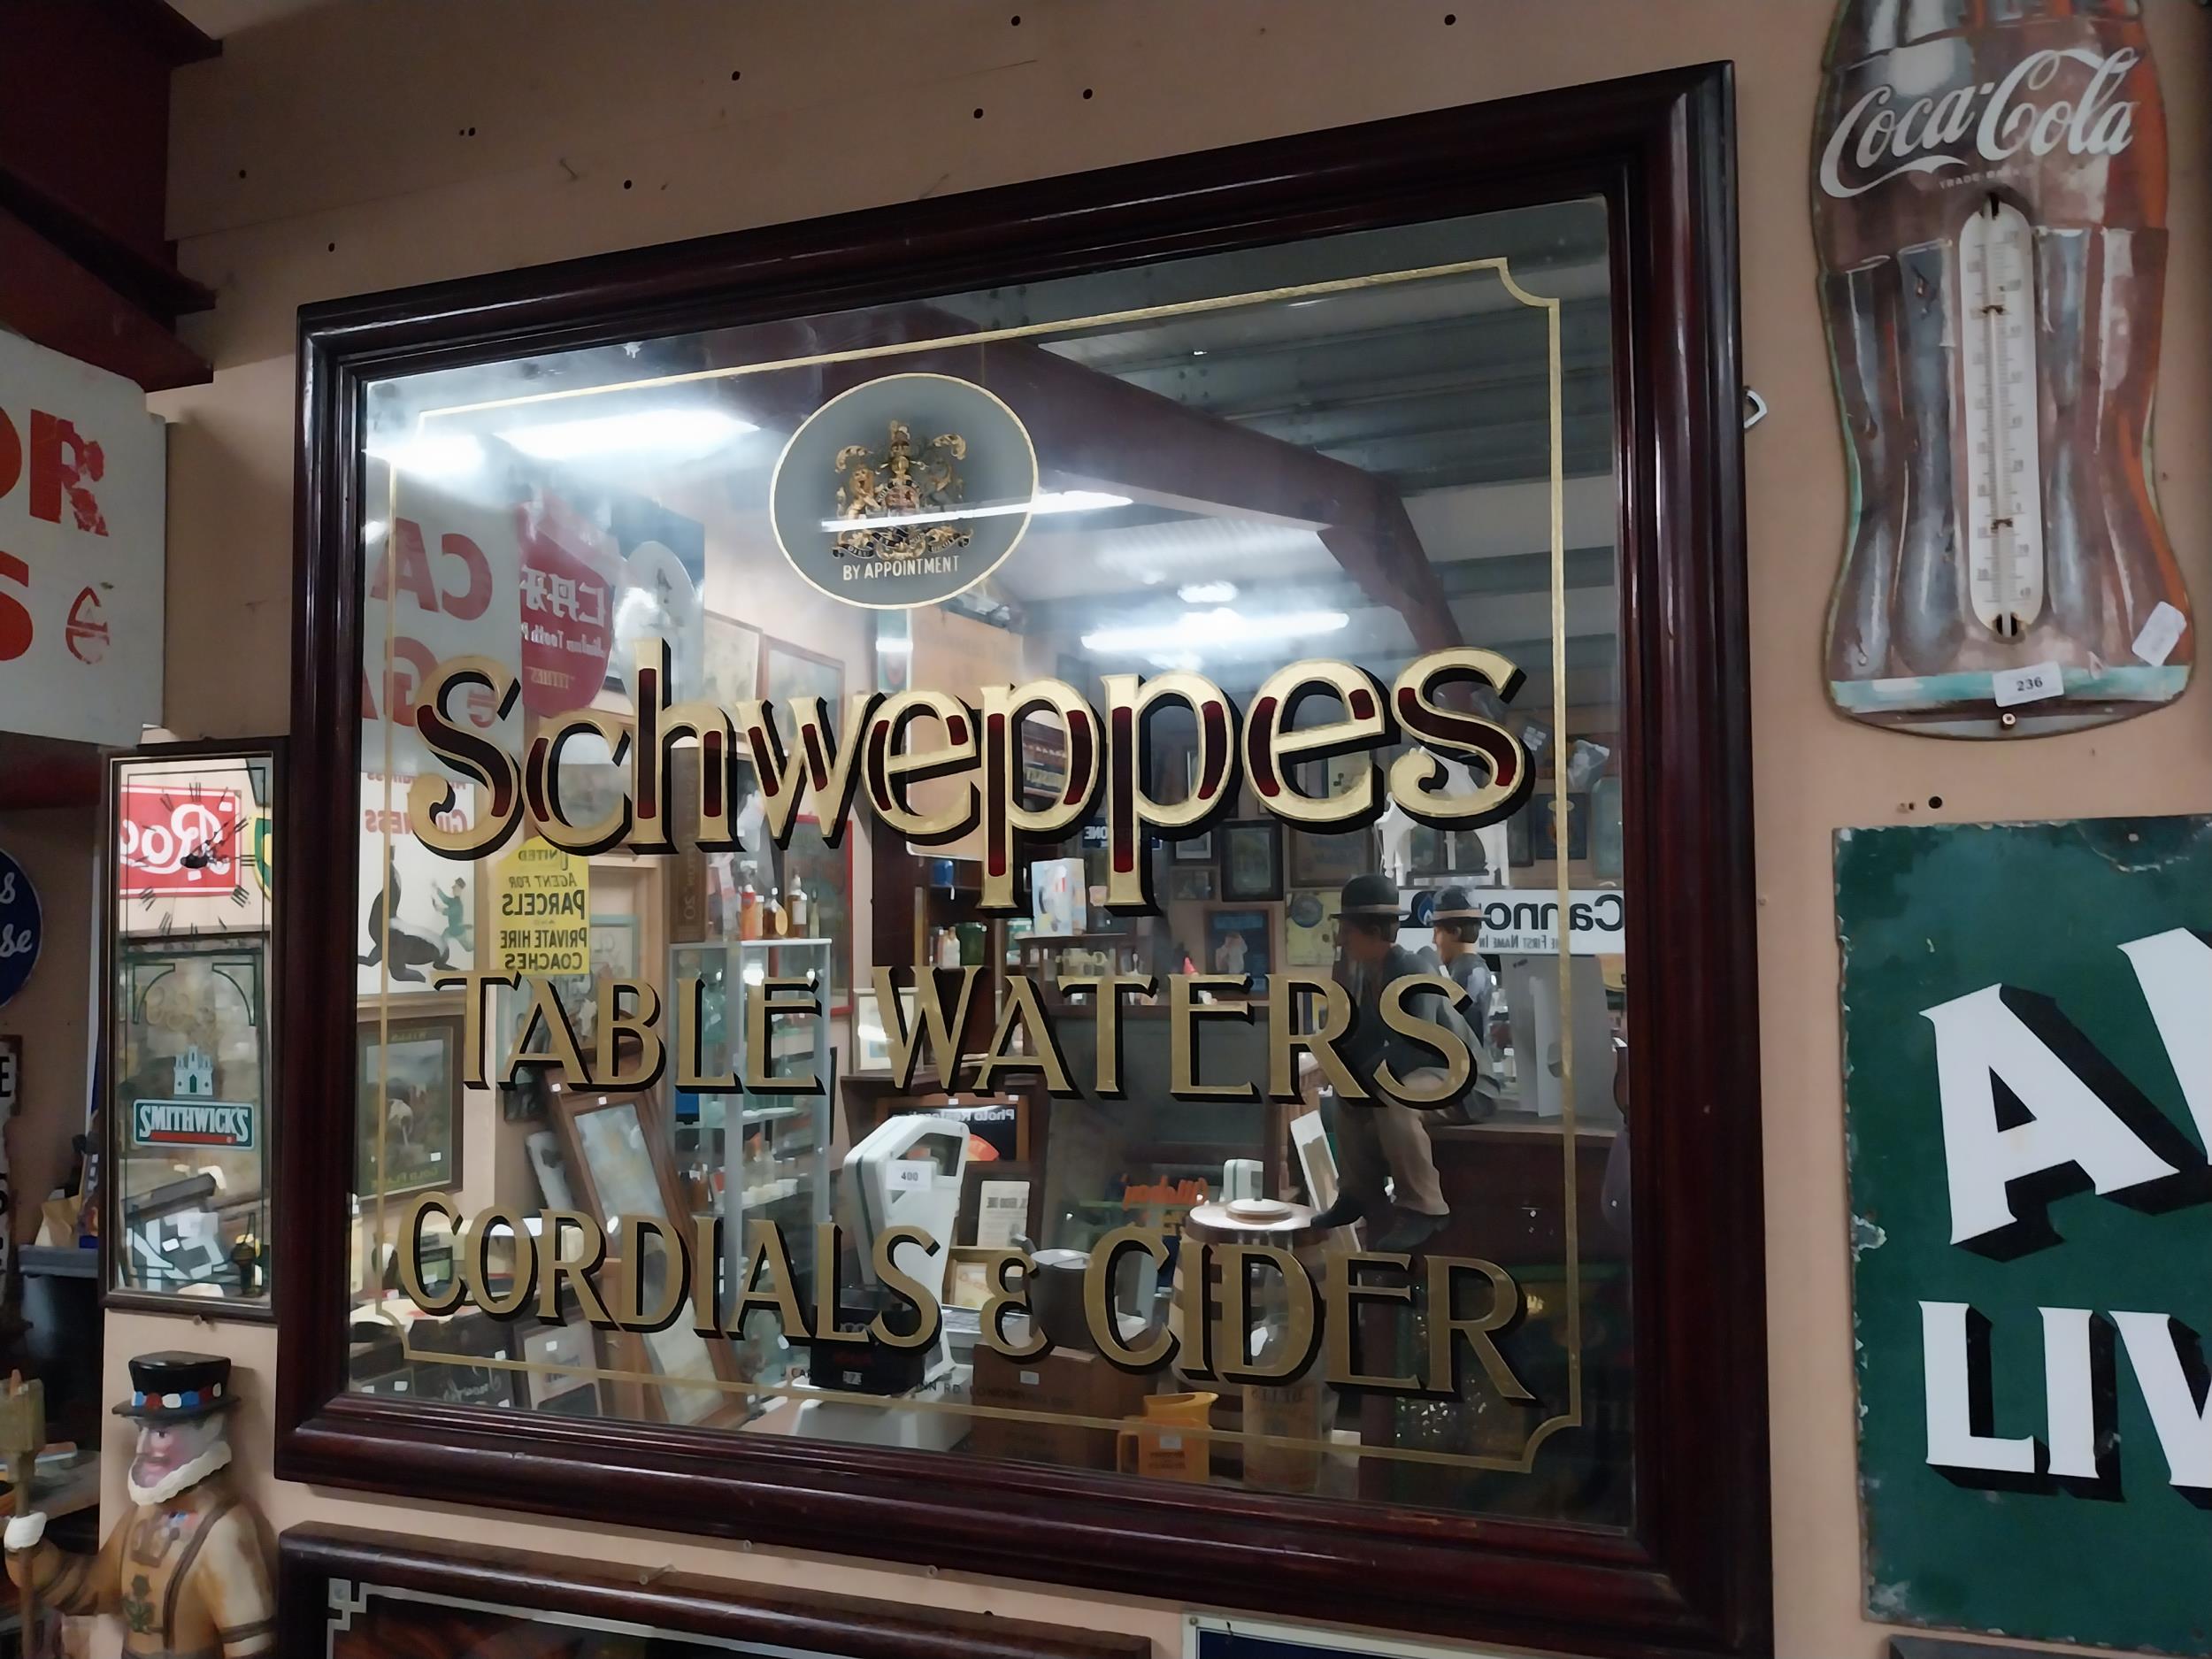 Schweppes Table Waters Cordials and Cider framed advertising mirror by J Carter 273 Grays Inn Road